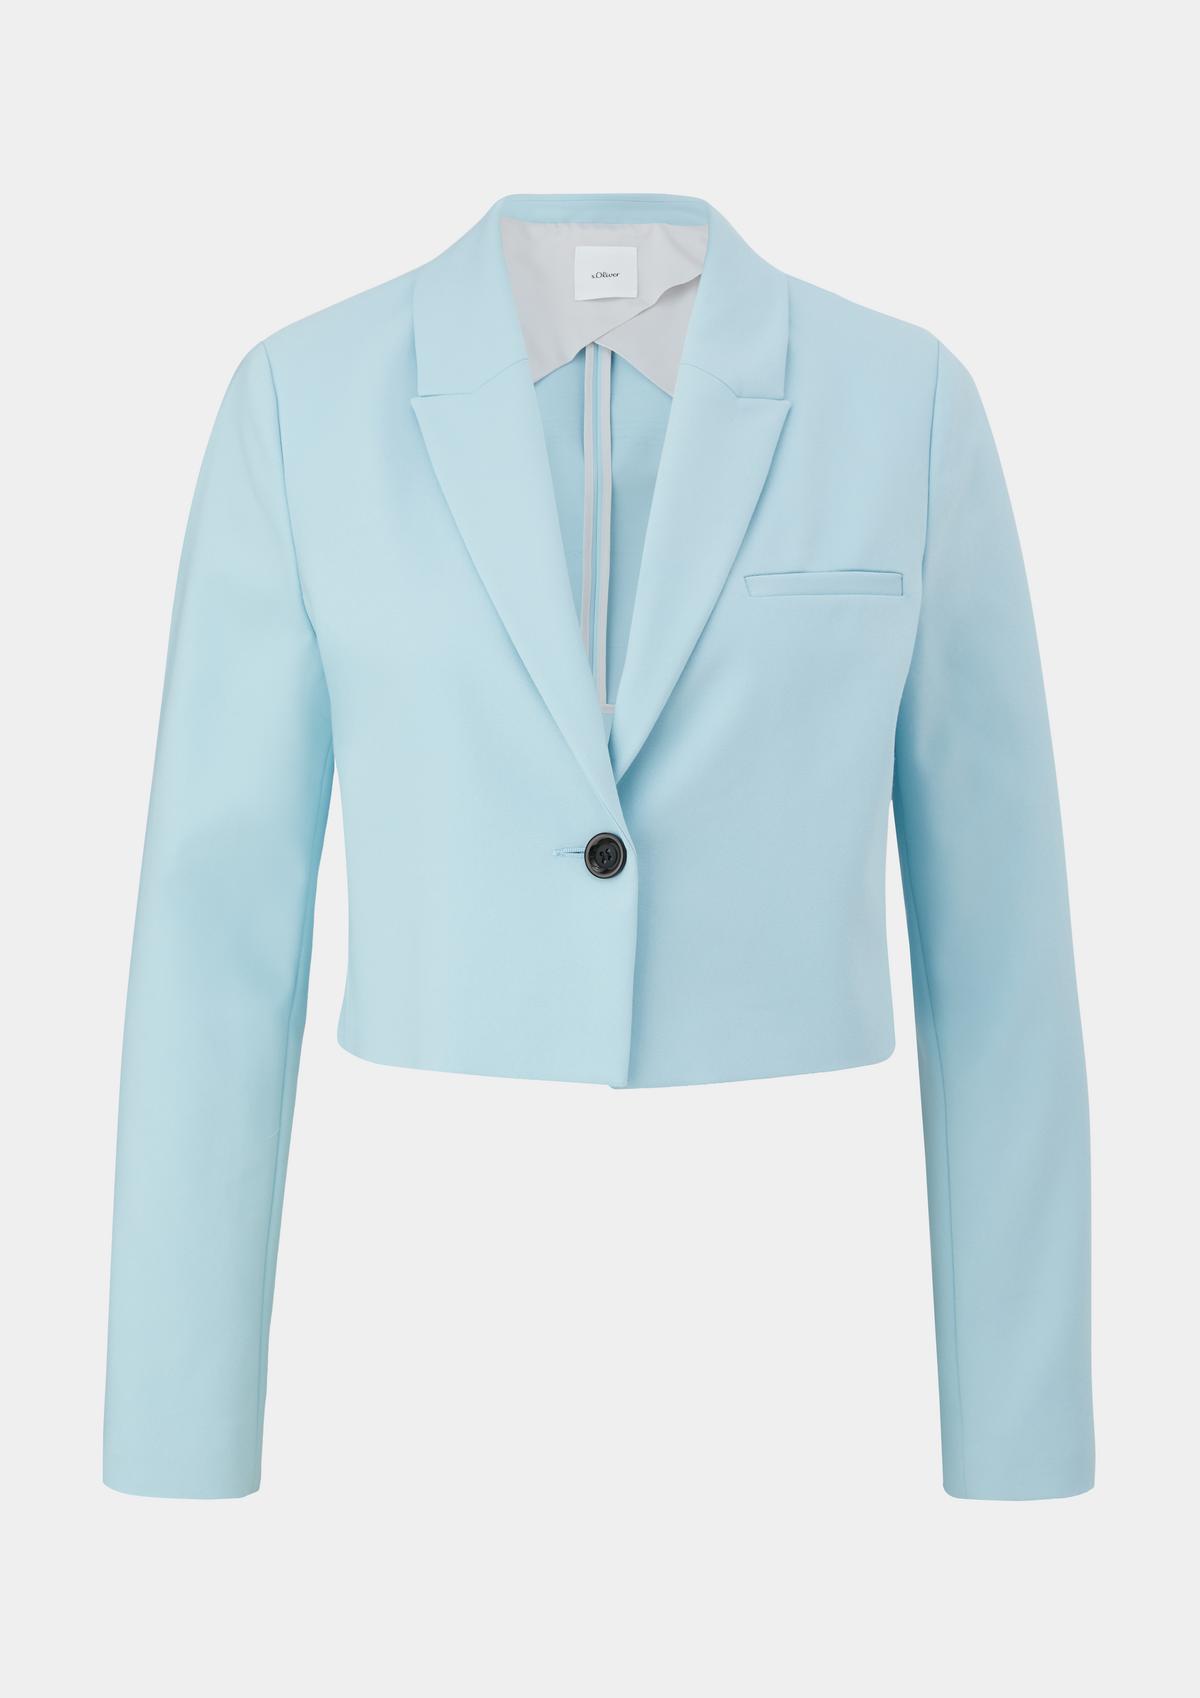 s.Oliver Cropped blazer made of a cotton blend